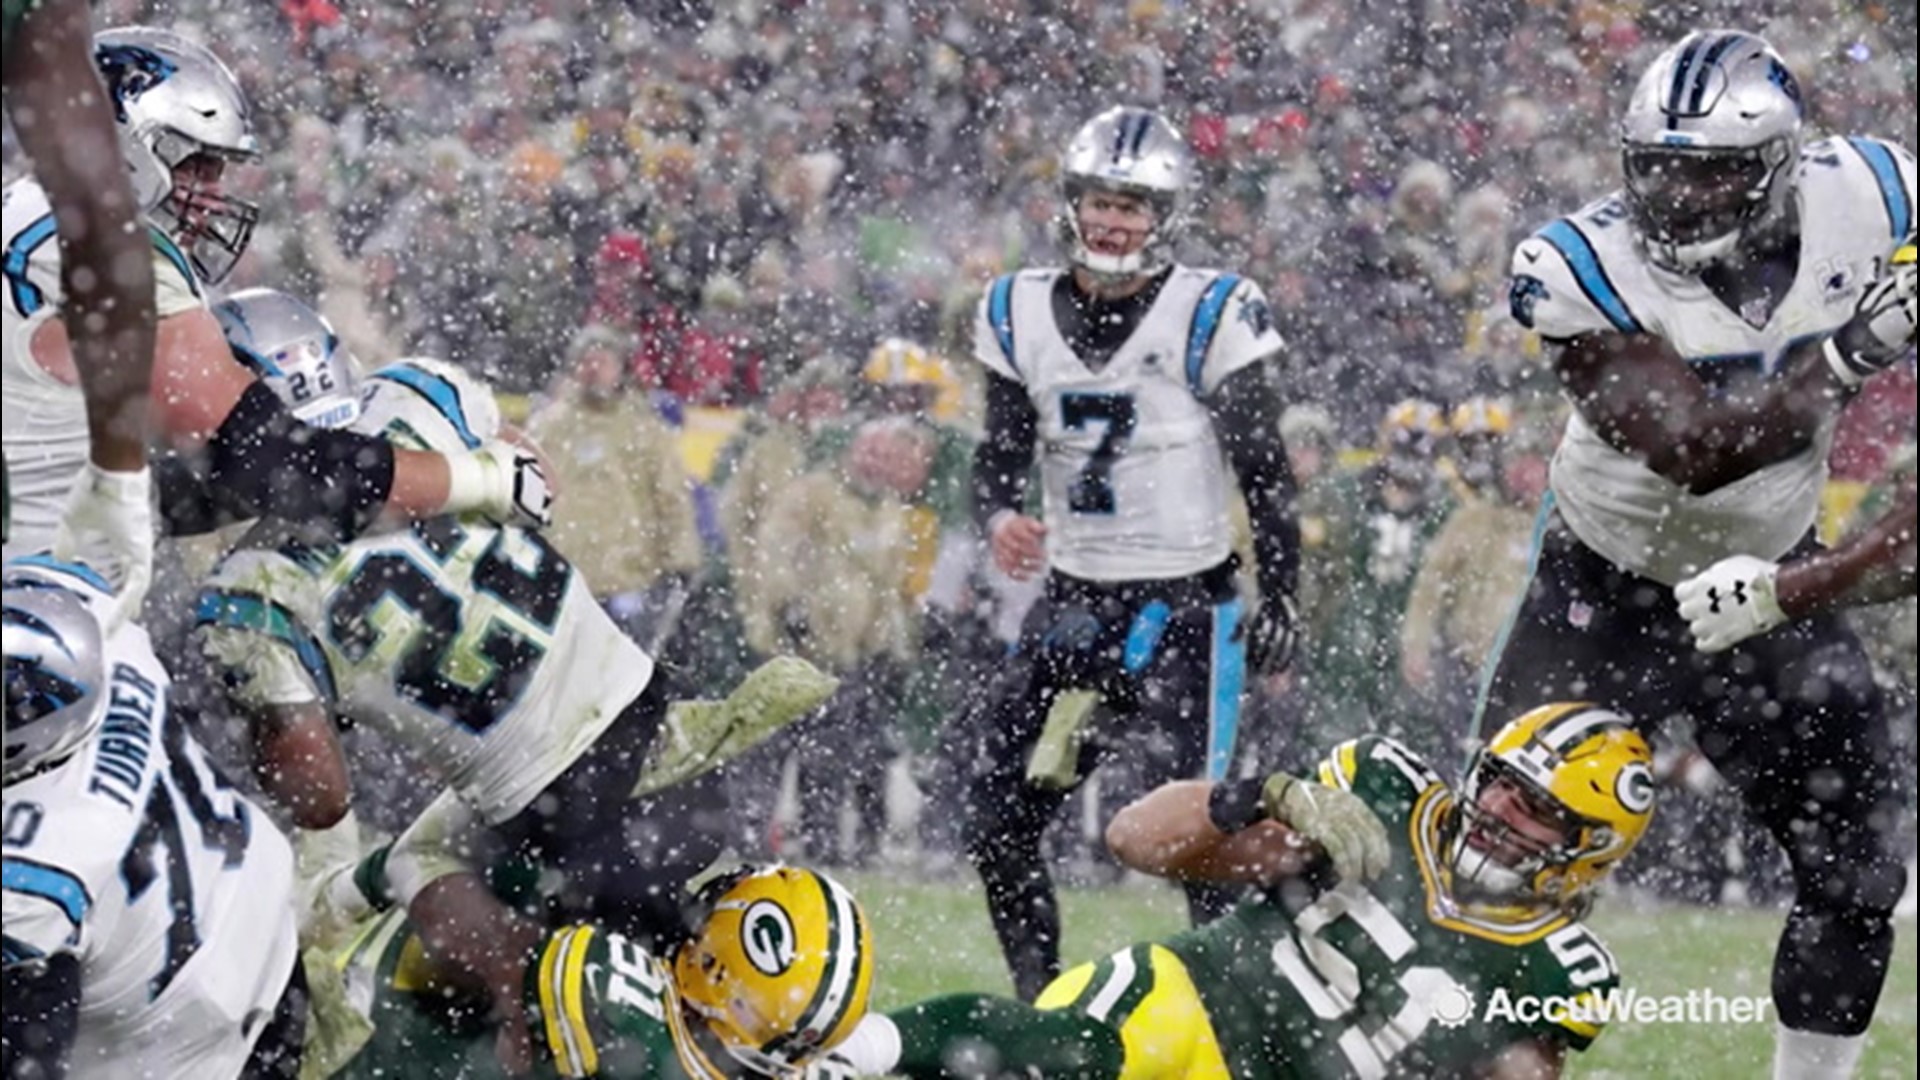 Former NFL Coach Dick Vermeil and Green Bay Packers' quarterback Aaron Rodgers weigh in on if bad weather is a danger or, in some cases, could be a sort of advantage.